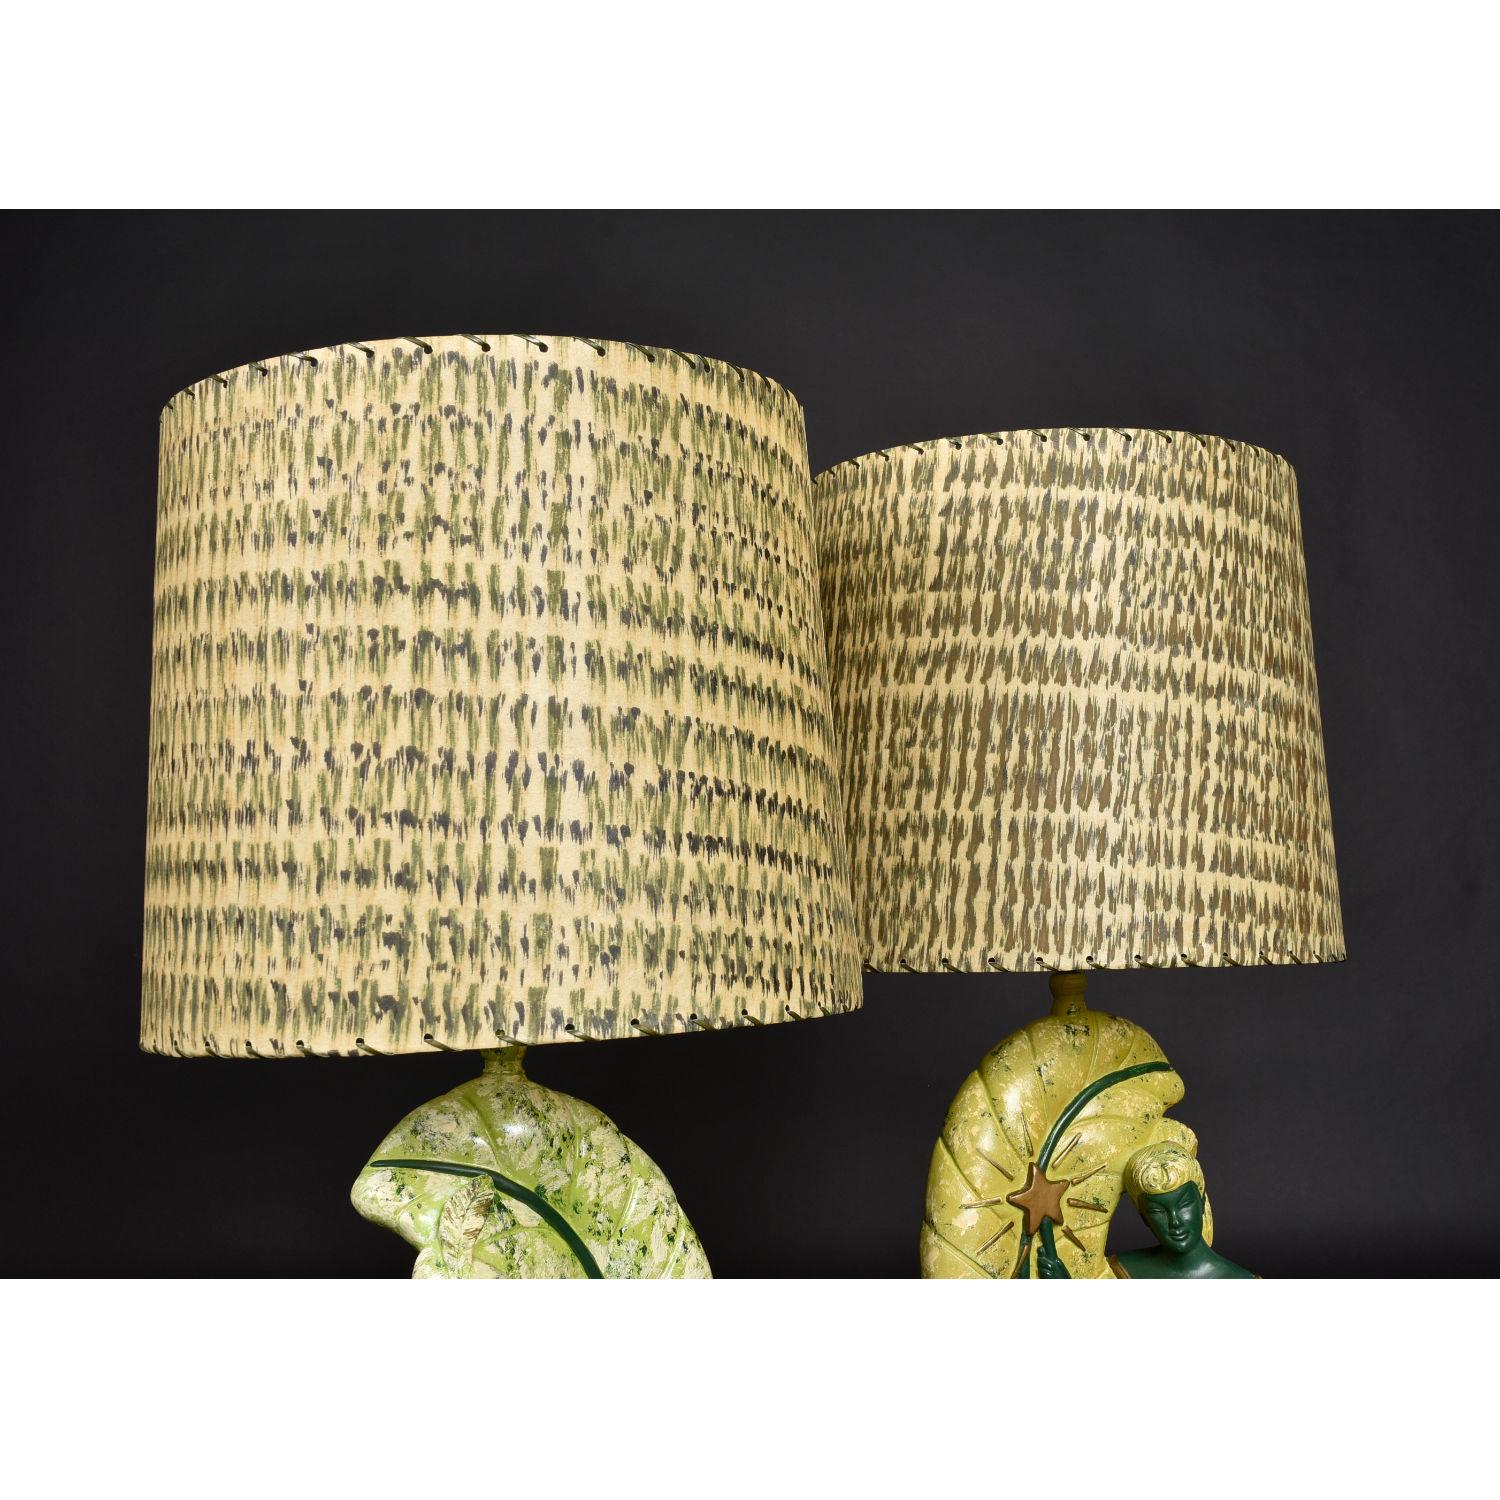 Continental Art Co. Green Fairy Chalkware Lamps with Fiberglass Shades In Excellent Condition For Sale In Chattanooga, TN